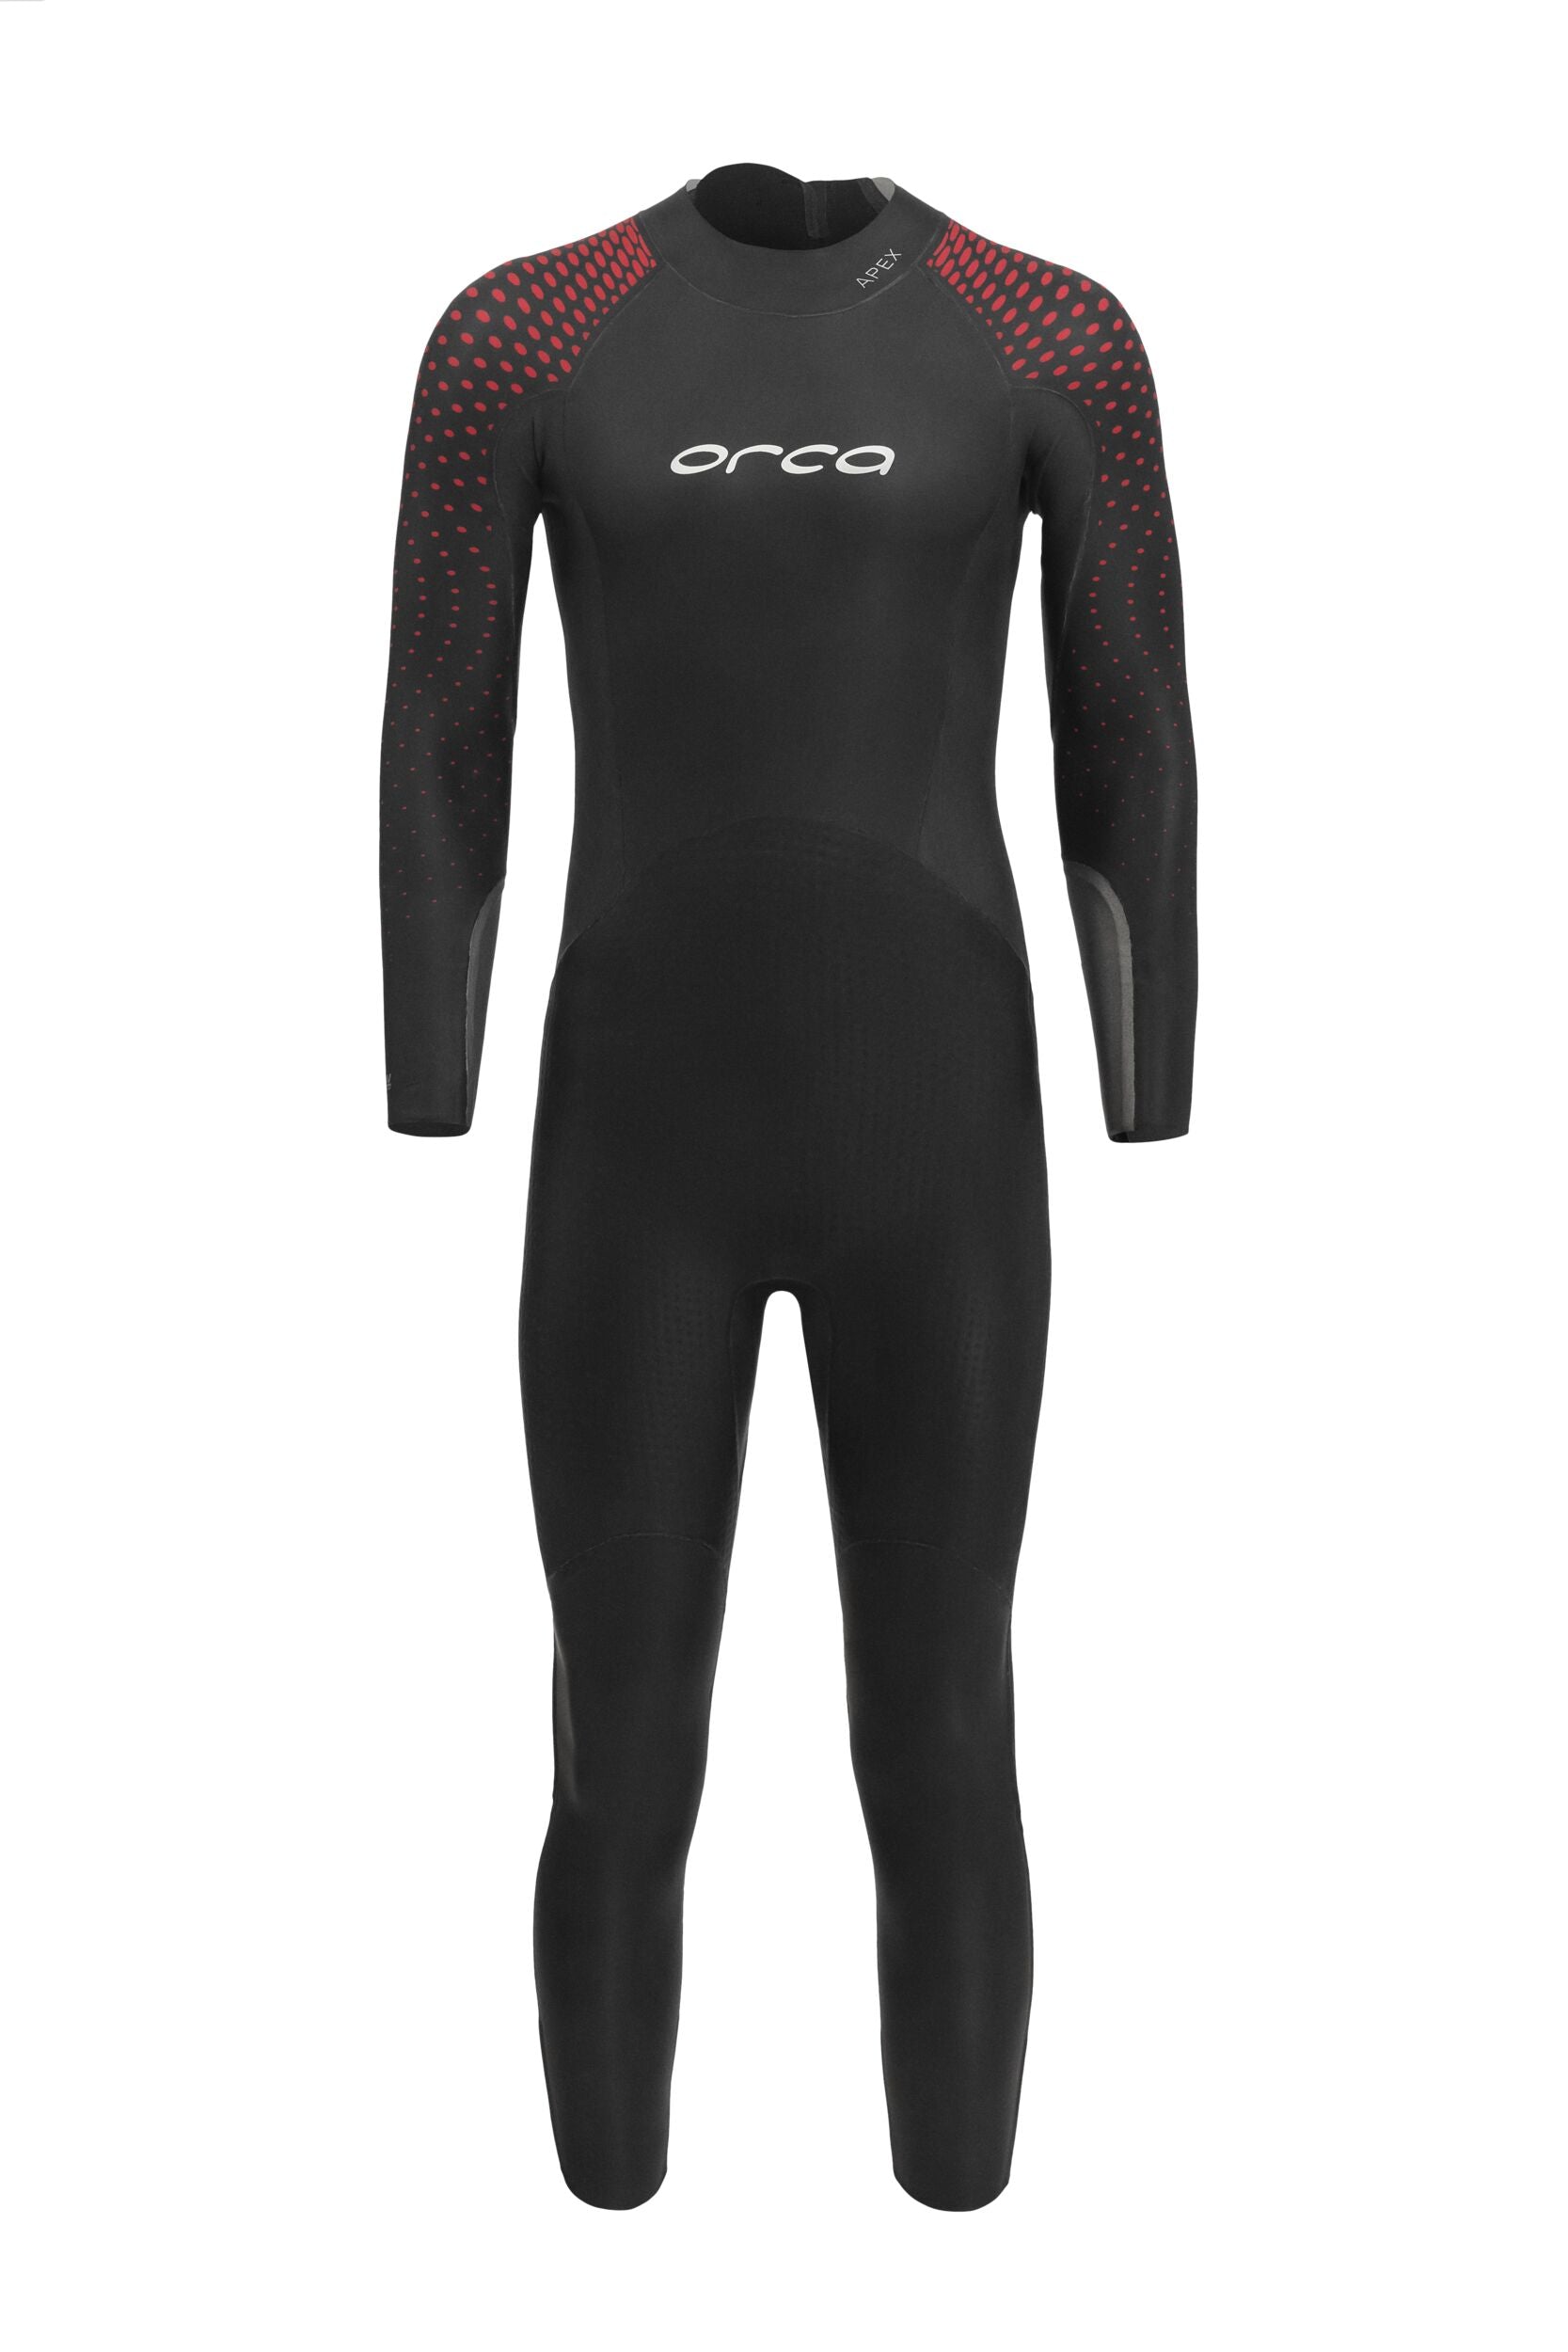 ORCA Apex Flex 2024 Wetsuit - Male (Formally the Orca Alpha) - Orca New  Zealand